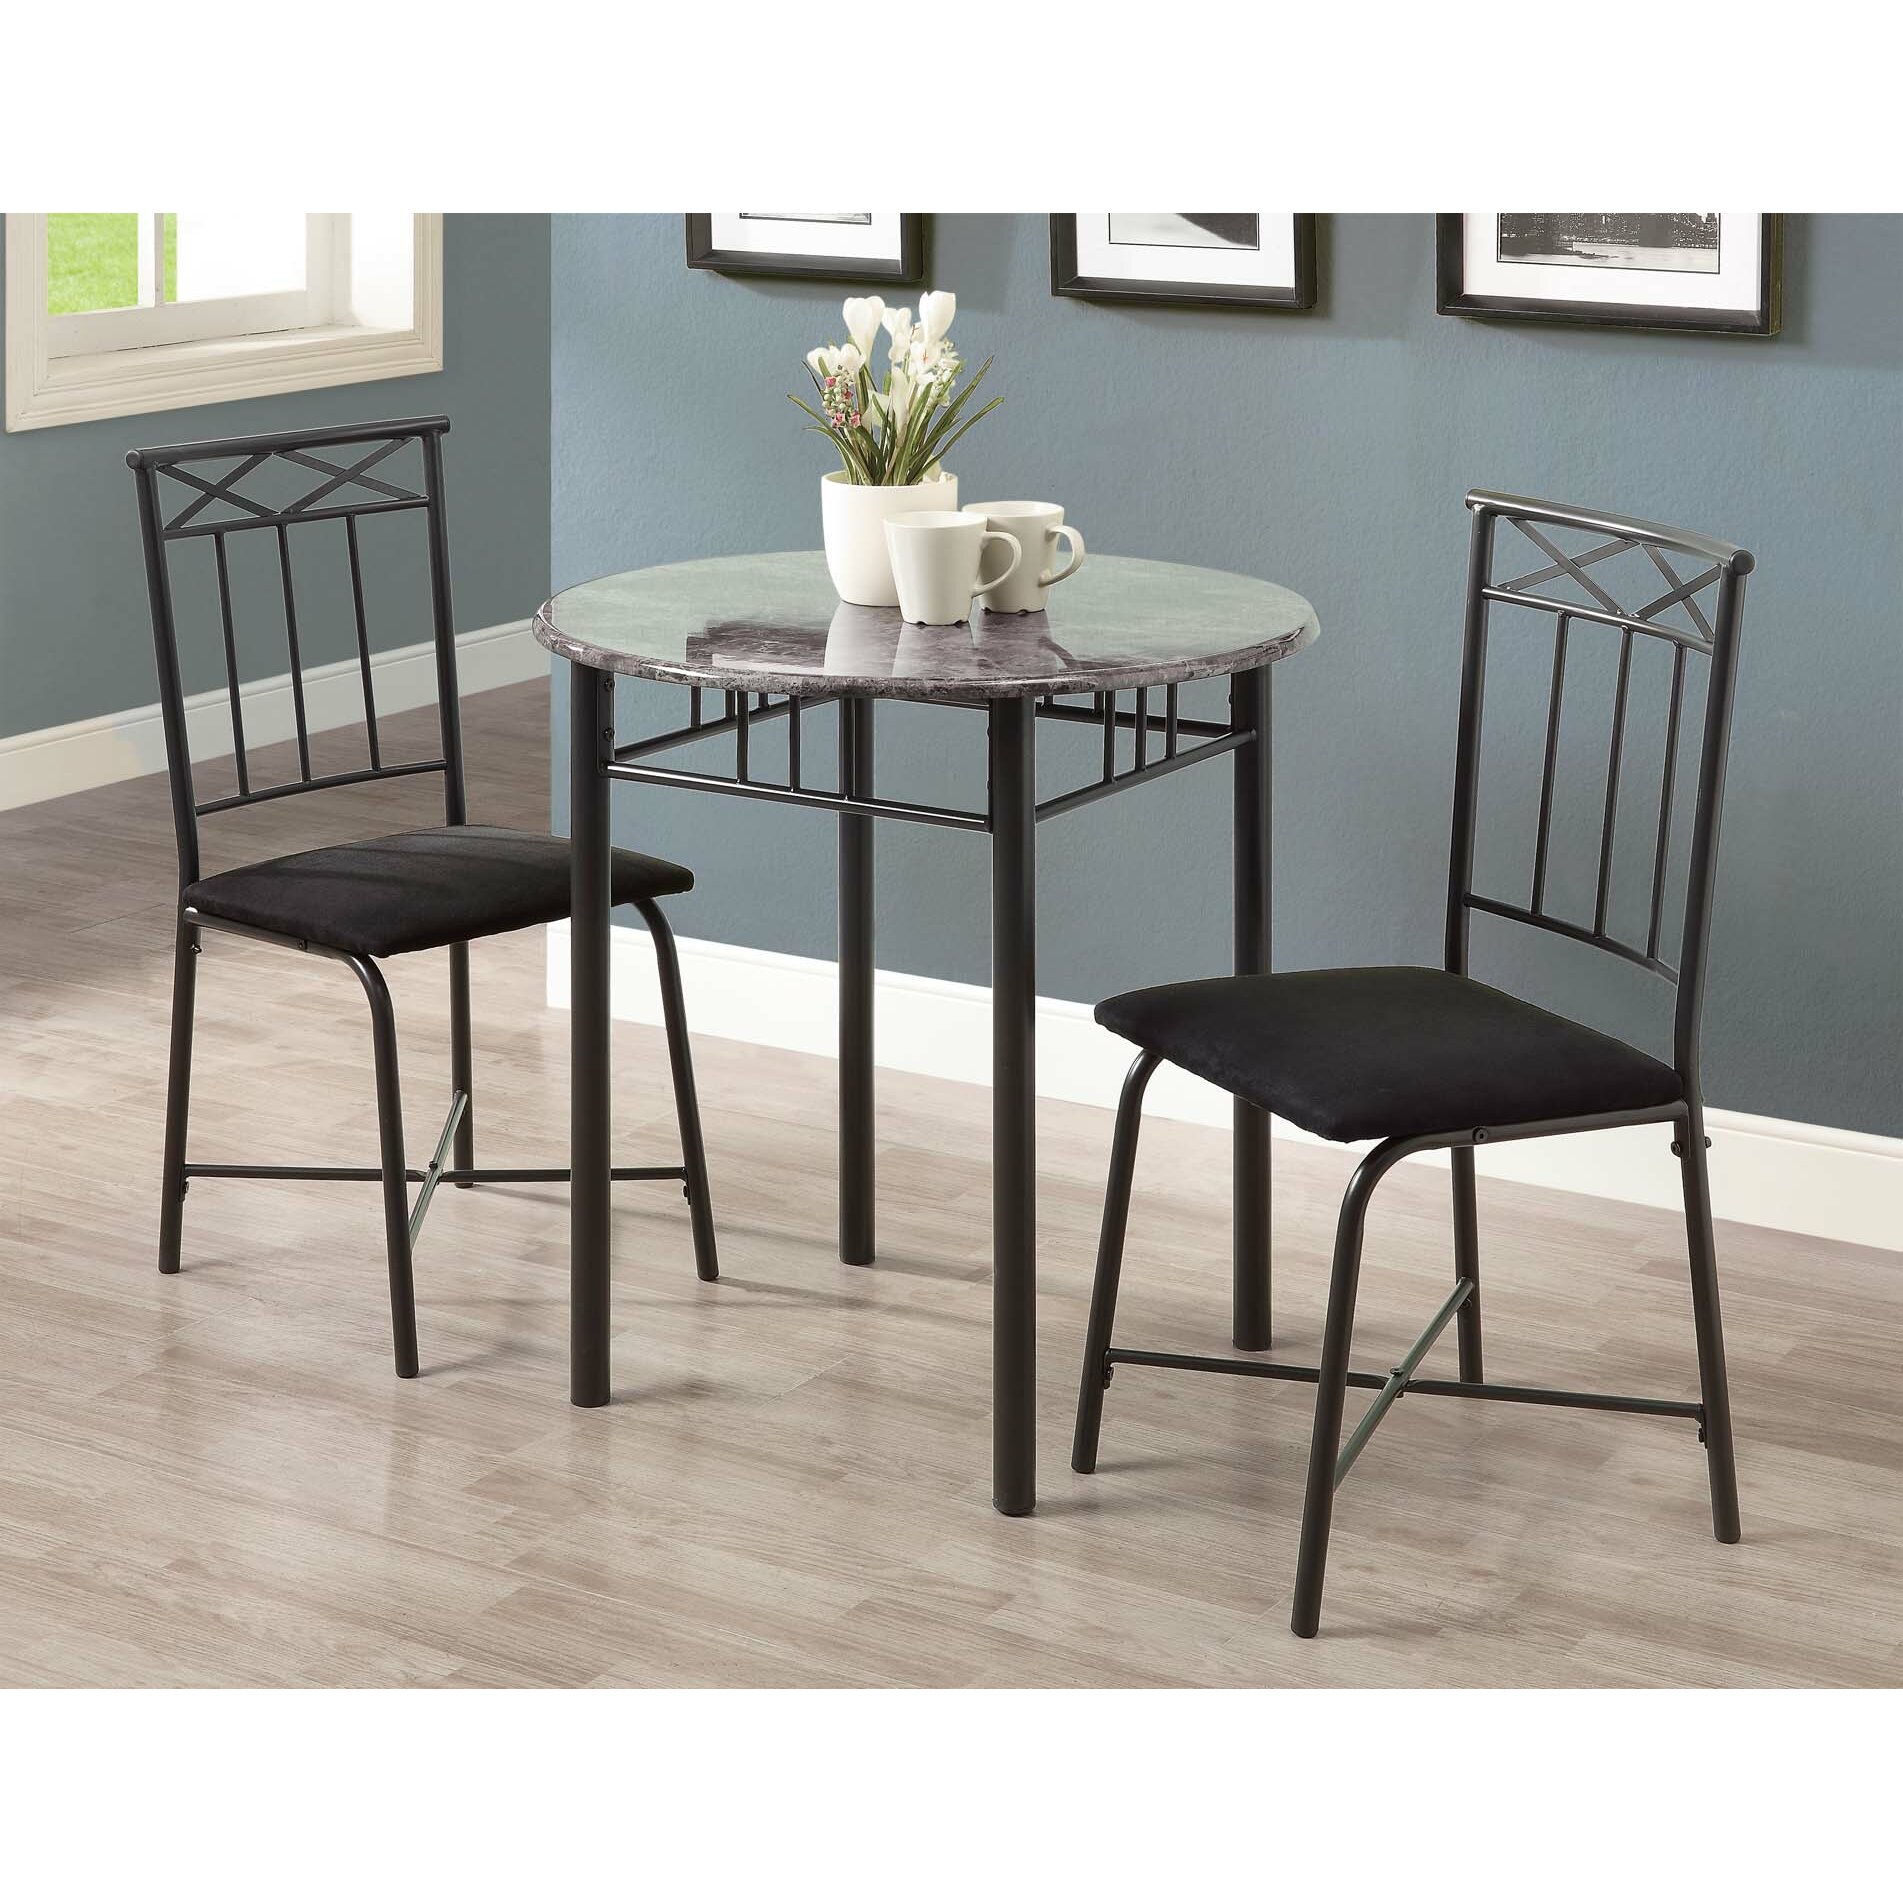 Monarch Table Set / Monarch Specialties Inc. Coffee Table Set & Reviews | Wayfair / Besides of its stylish look.